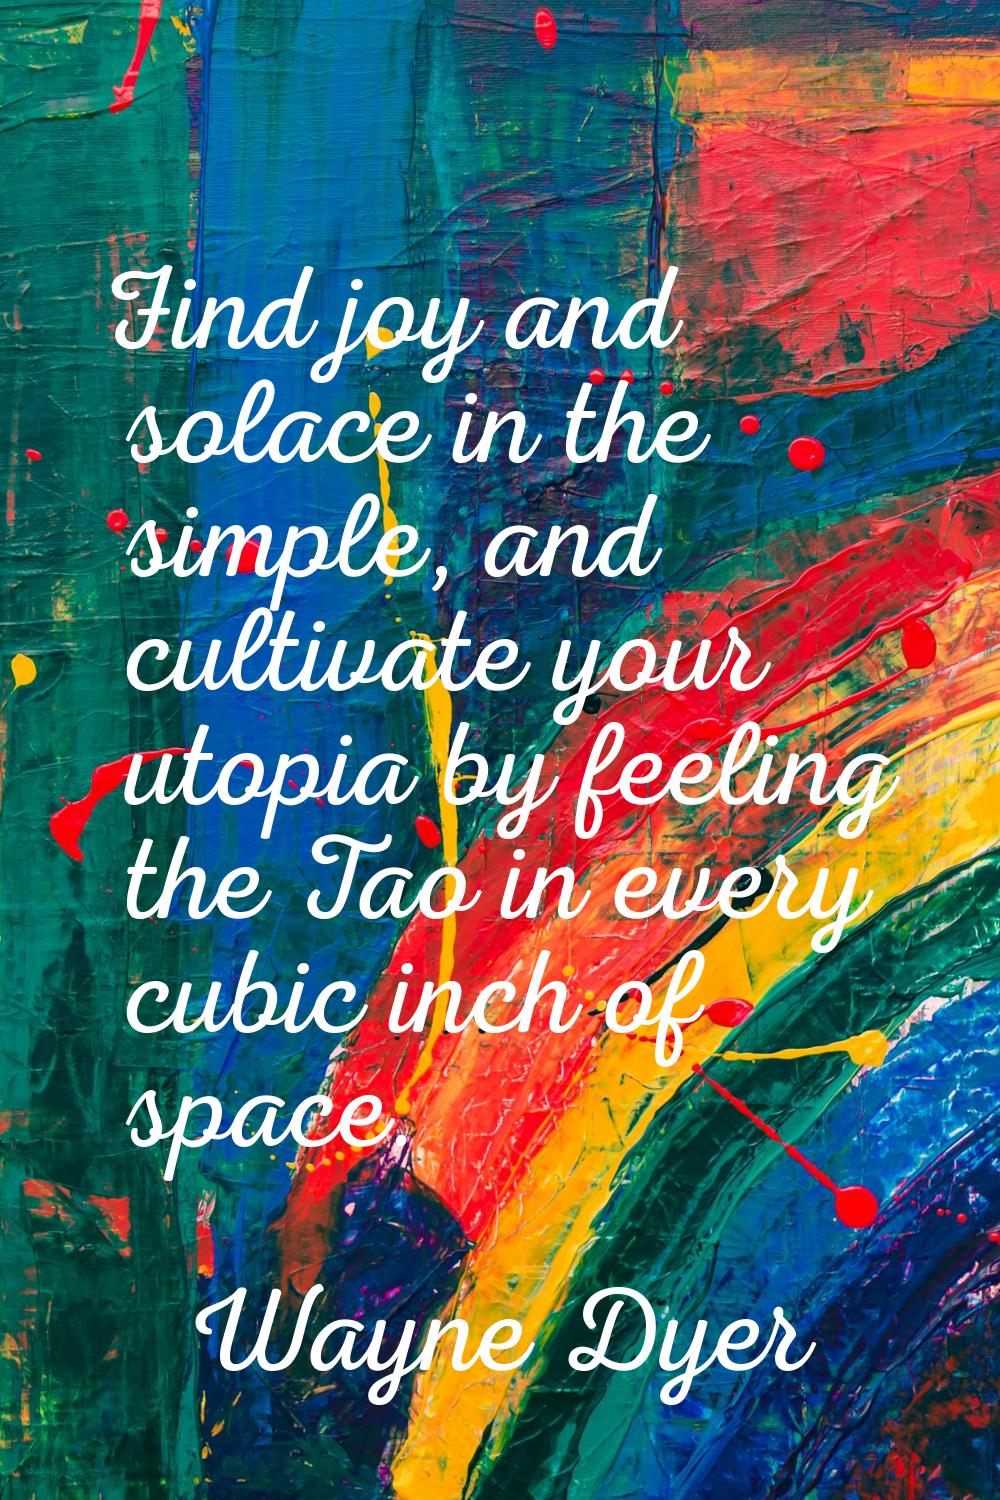 Find joy and solace in the simple, and cultivate your utopia by feeling the Tao in every cubic inch